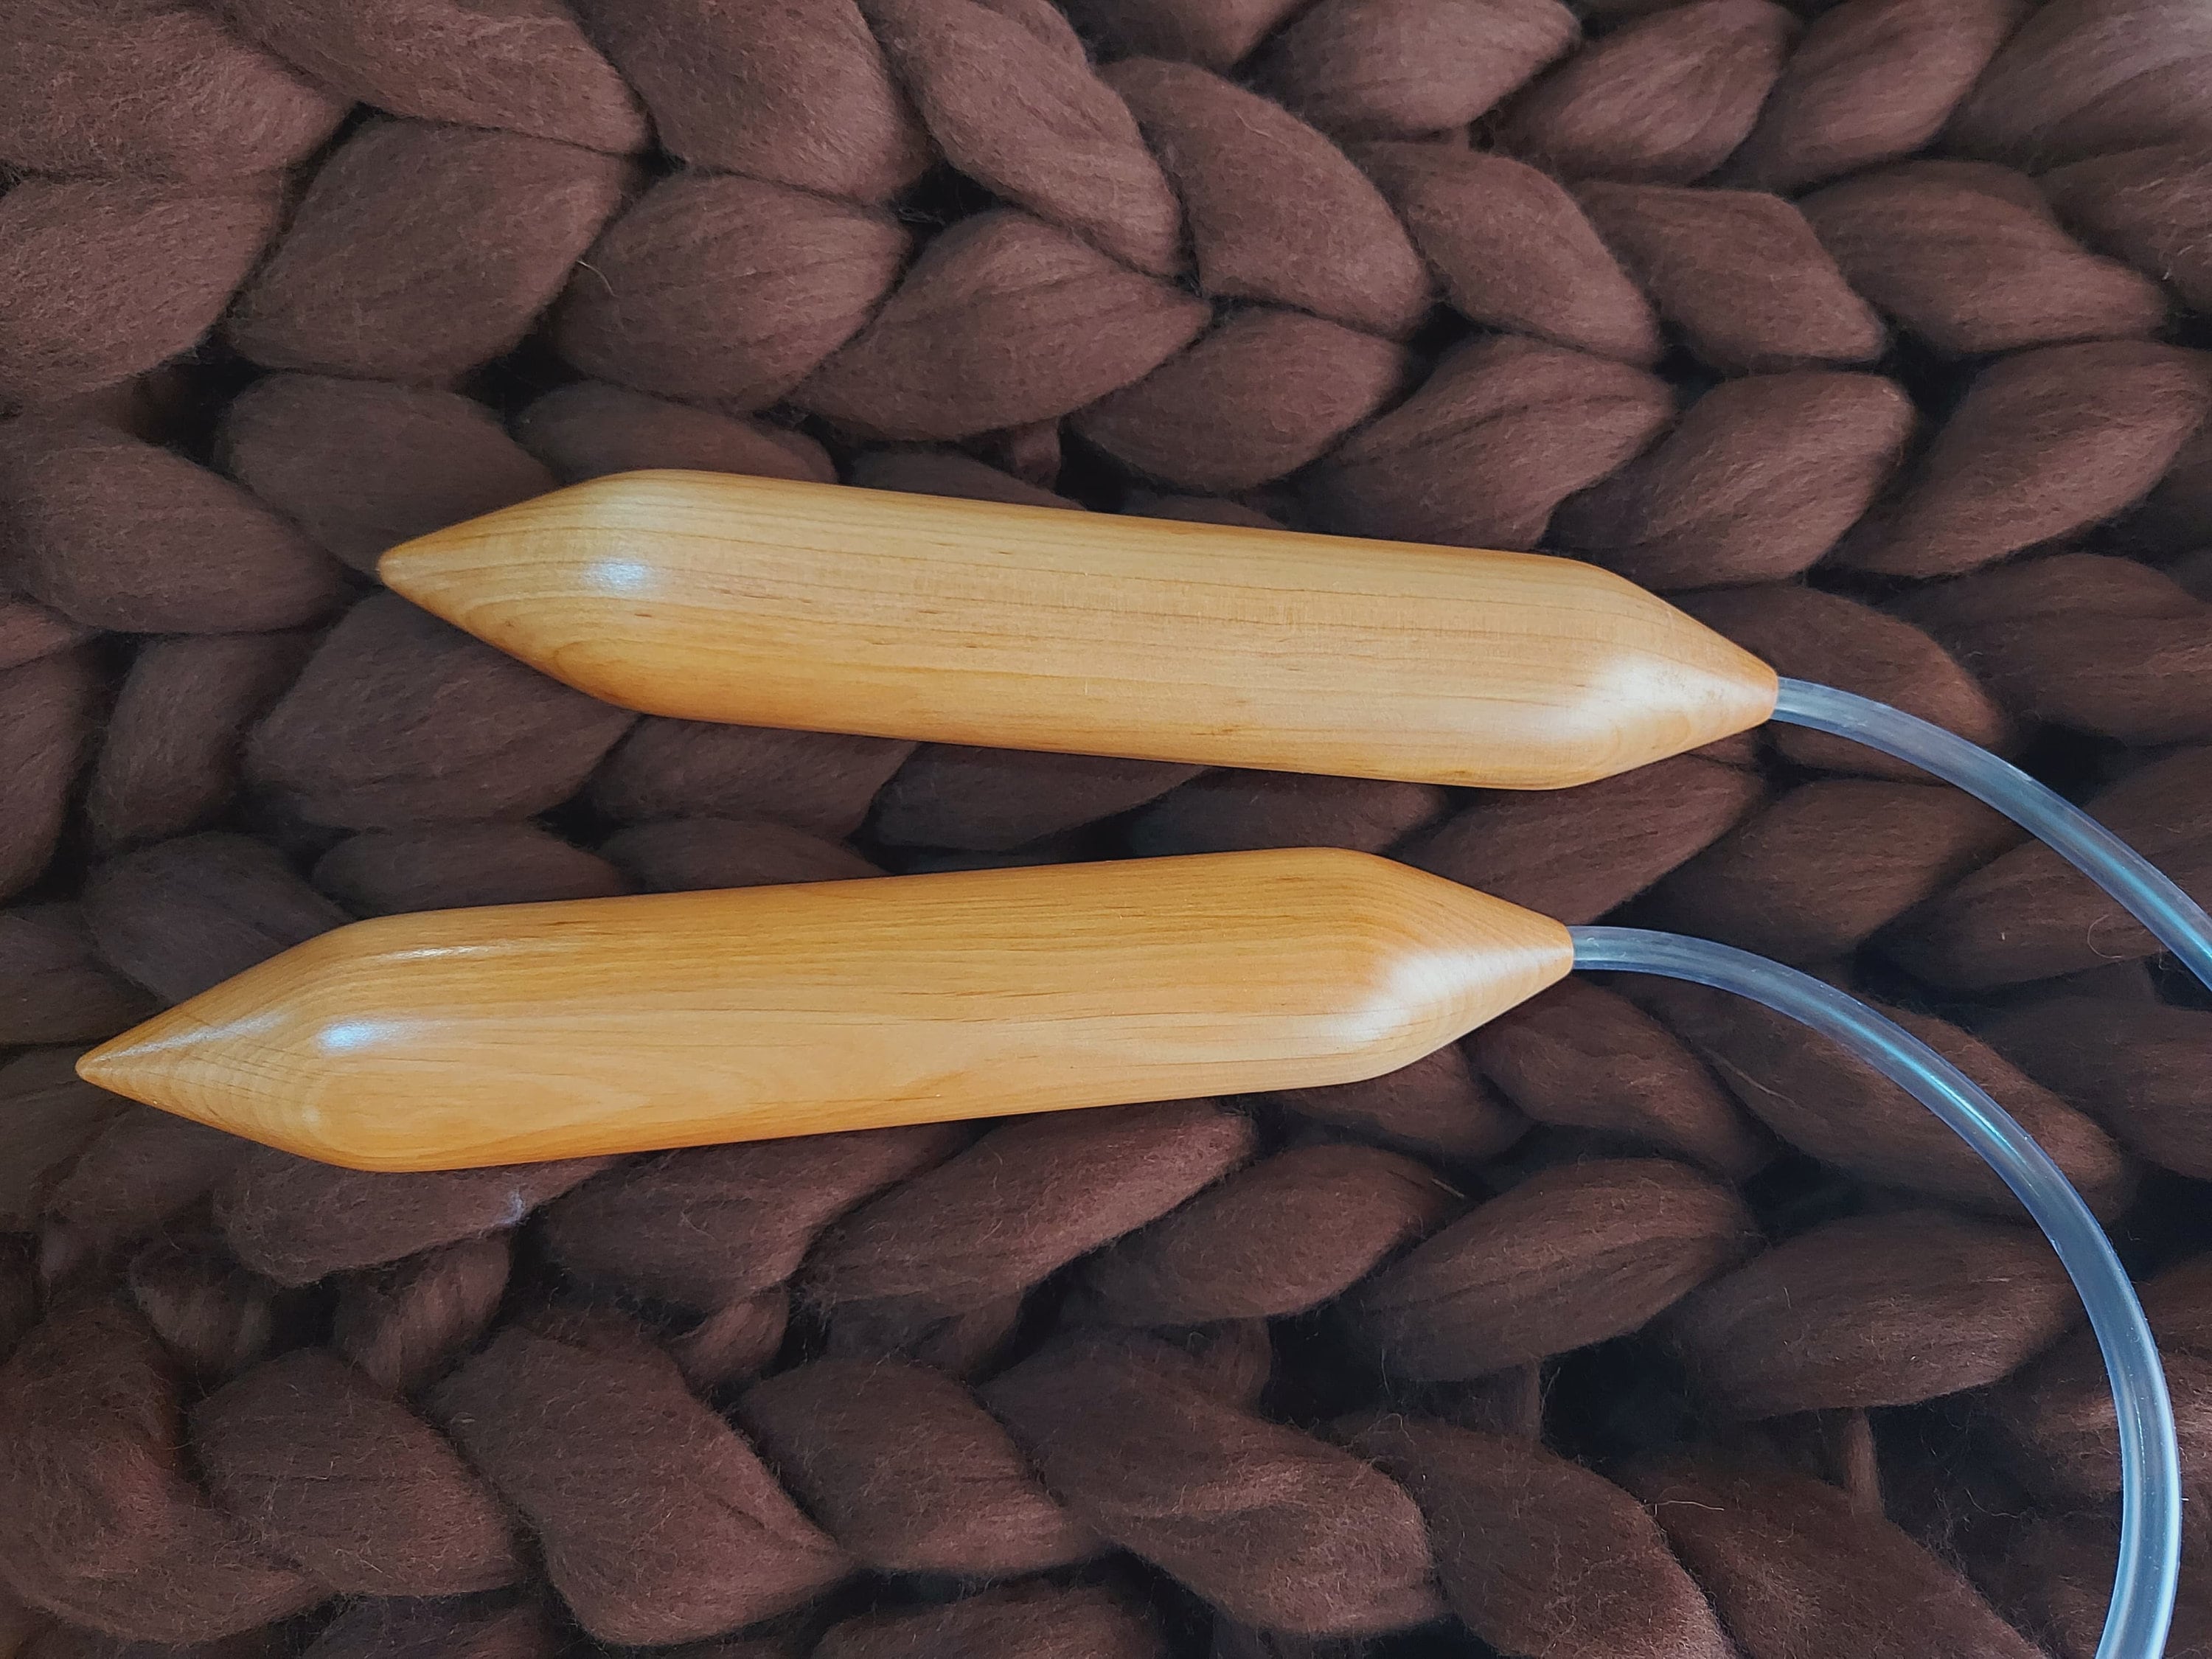 Knitting Needles,knitting,wooden Needles,big Knitting Needles,knitting  Supplies,needles,gift for Grandma,personalized Gift,gift for Her,idea 